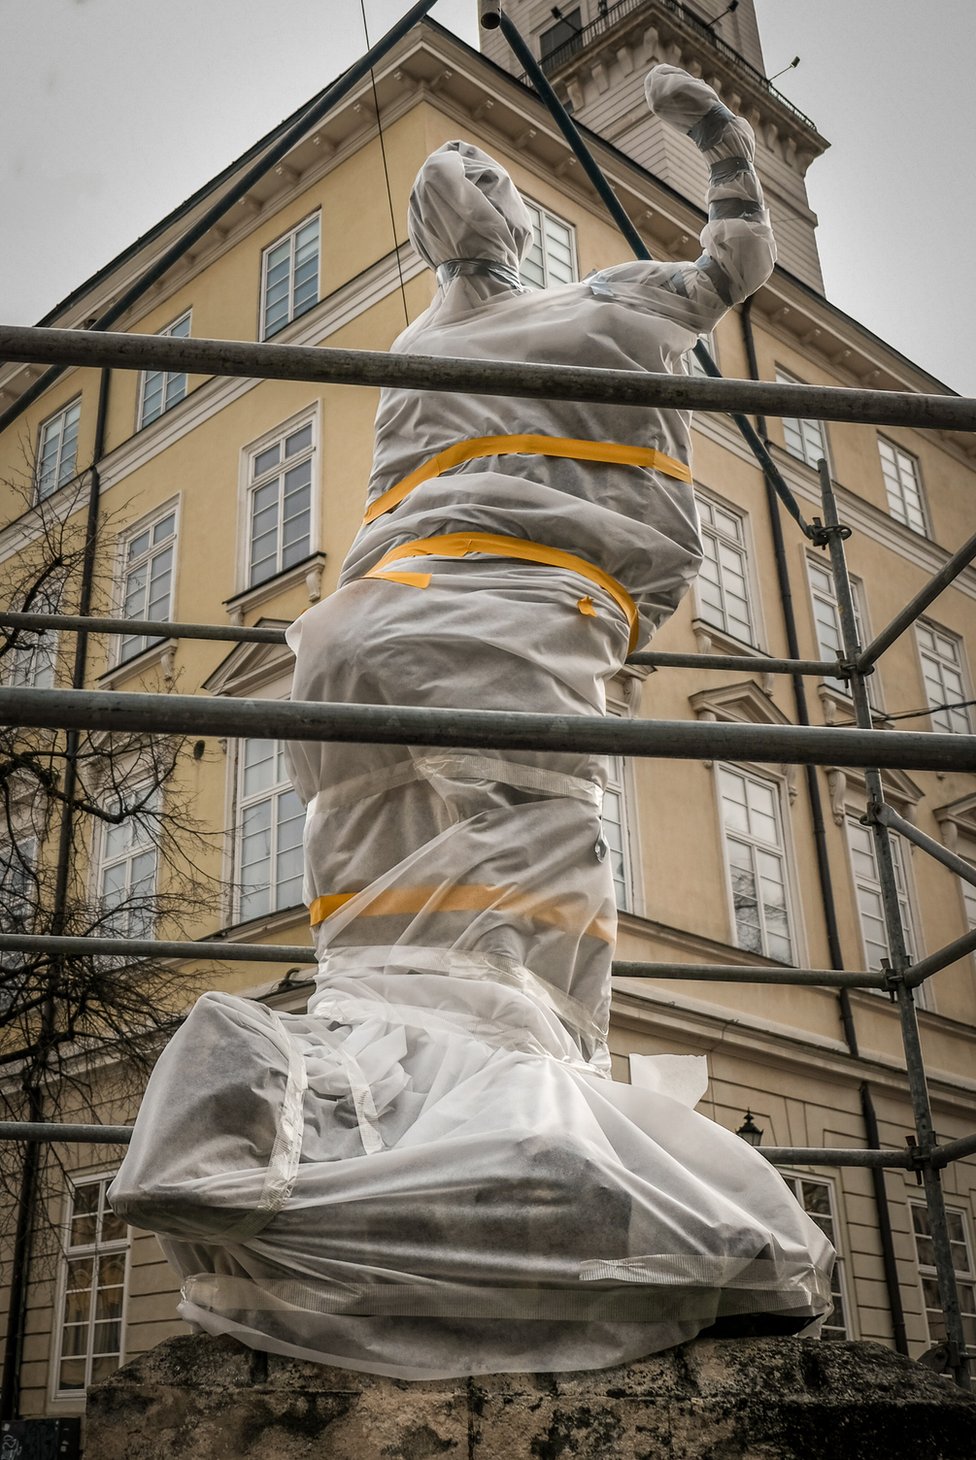 Greek gods and goddesses on fountains in Lviv's town square have been wrapped and scaffolded.